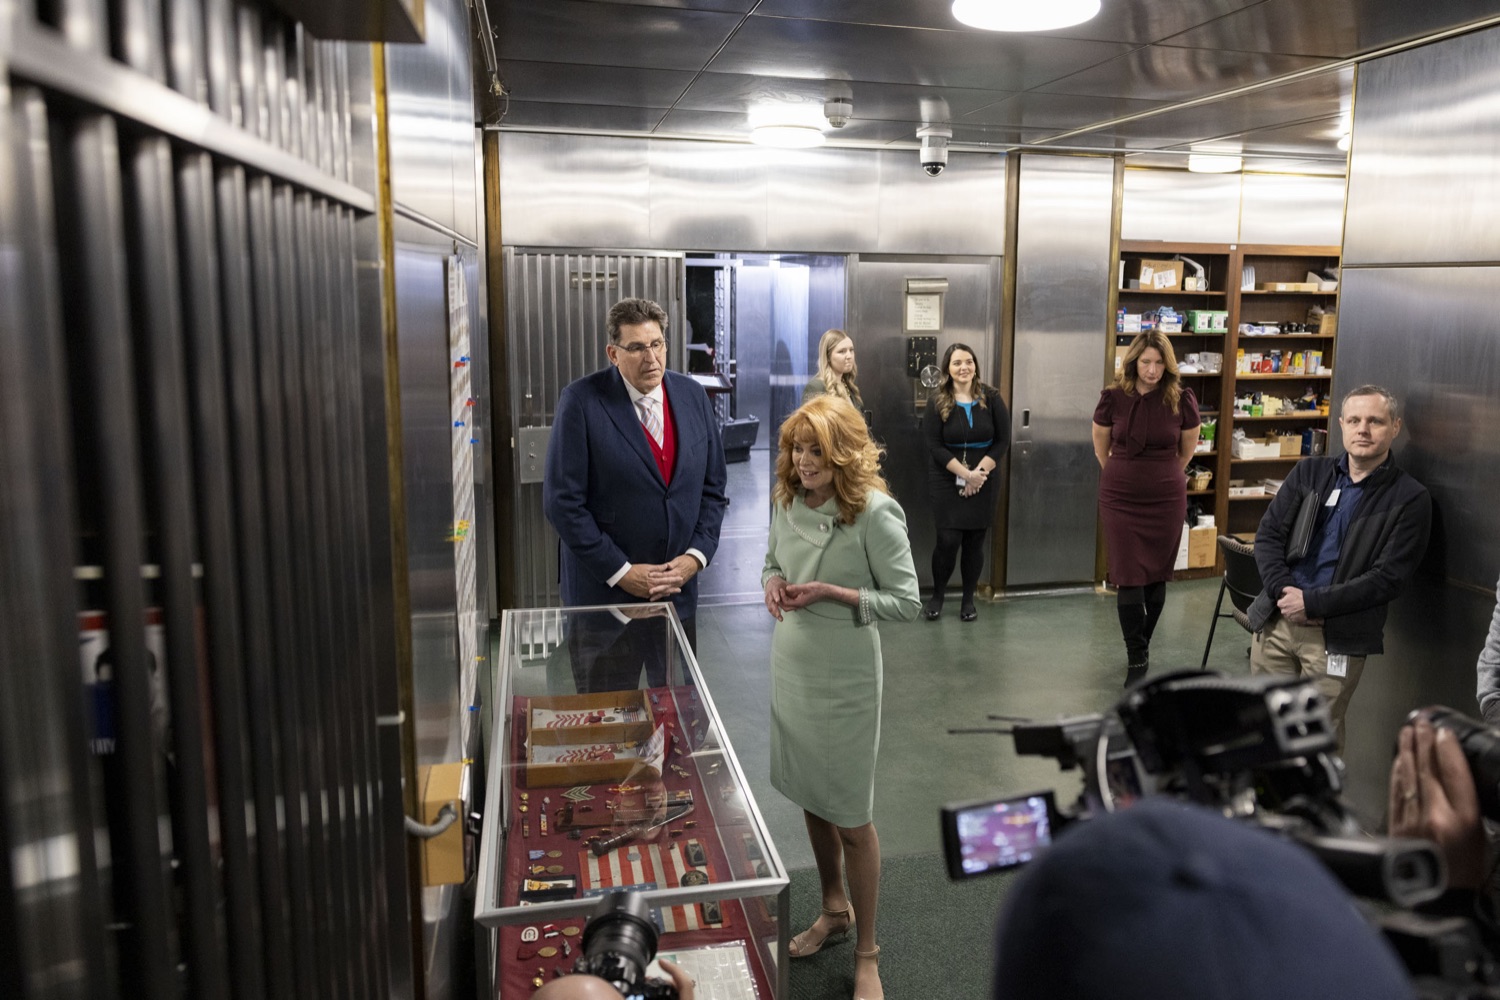 Pennsylvania Treasurer Stacy Garrity gives a tour of the Finance Building's historic vault, which stores tangible property reported to the Bureau of Unclaimed Property, including gold, collectibles, and military decorations, in Harrisburg, PA on March 15, 2023.<br><a href="https://filesource.amperwave.net/commonwealthofpa/photo/22711_treas_vault_cz_08.jpg" target="_blank">⇣ Download Photo</a>